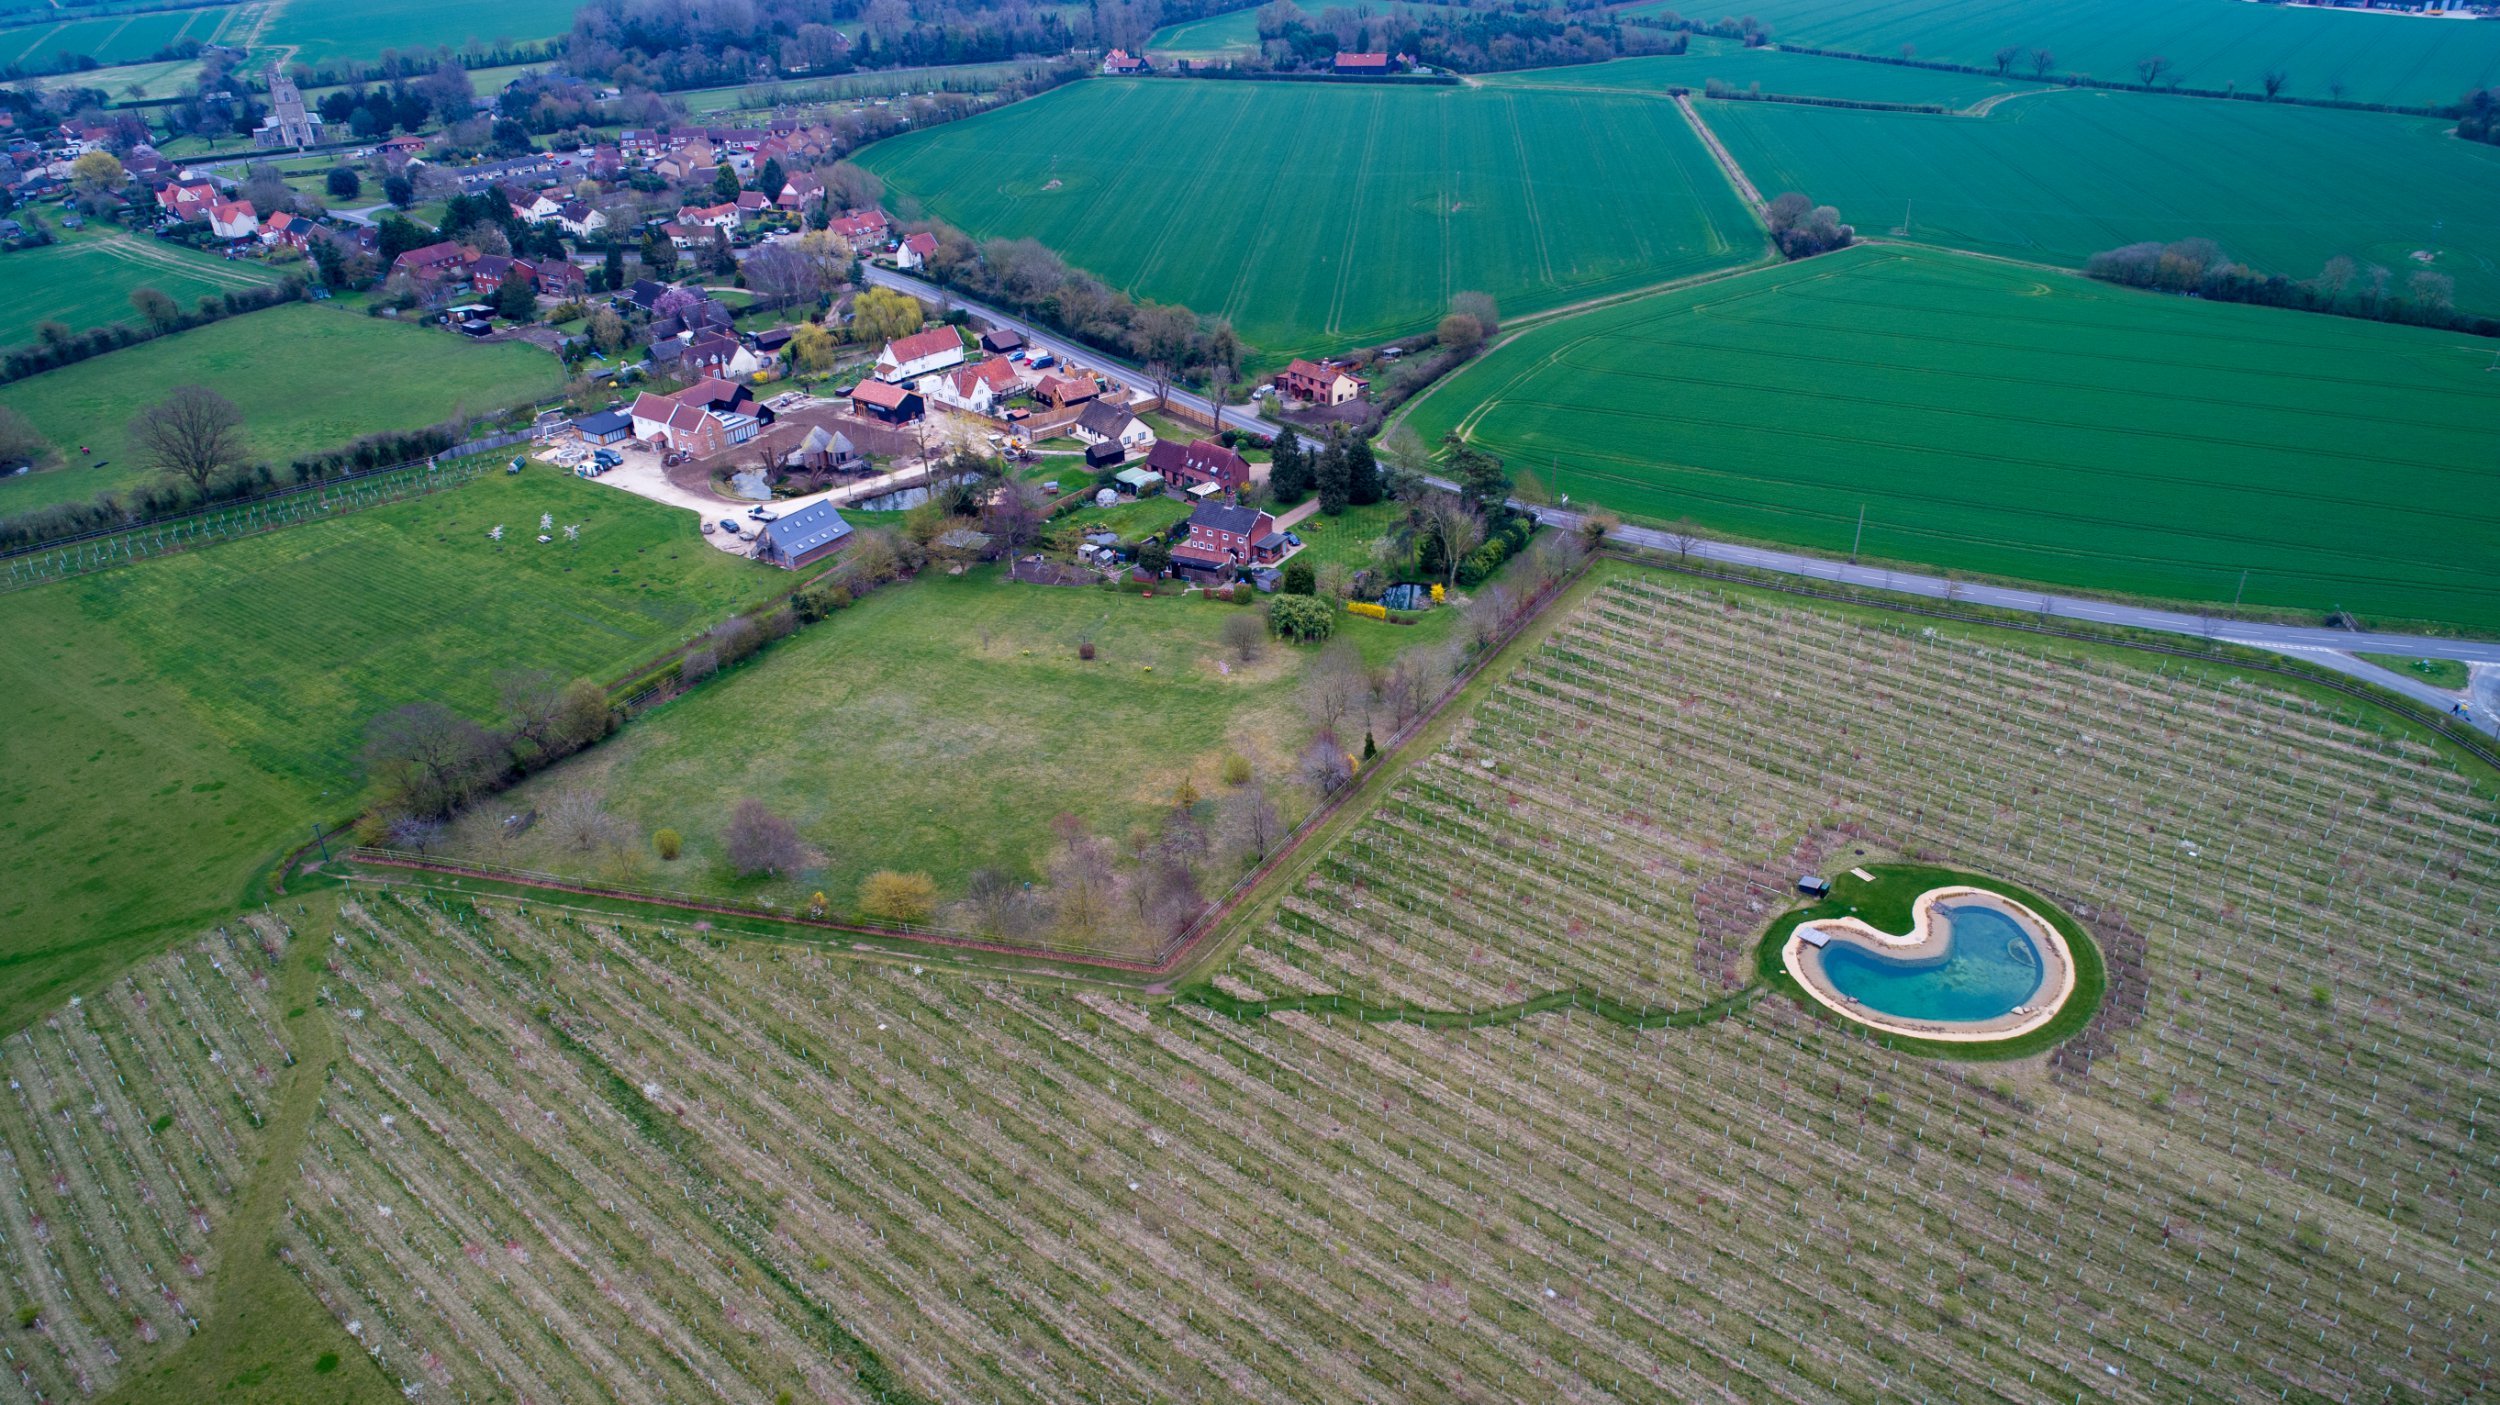  the "wildlife pond" at Ed Sheeran's house in Suffolk.